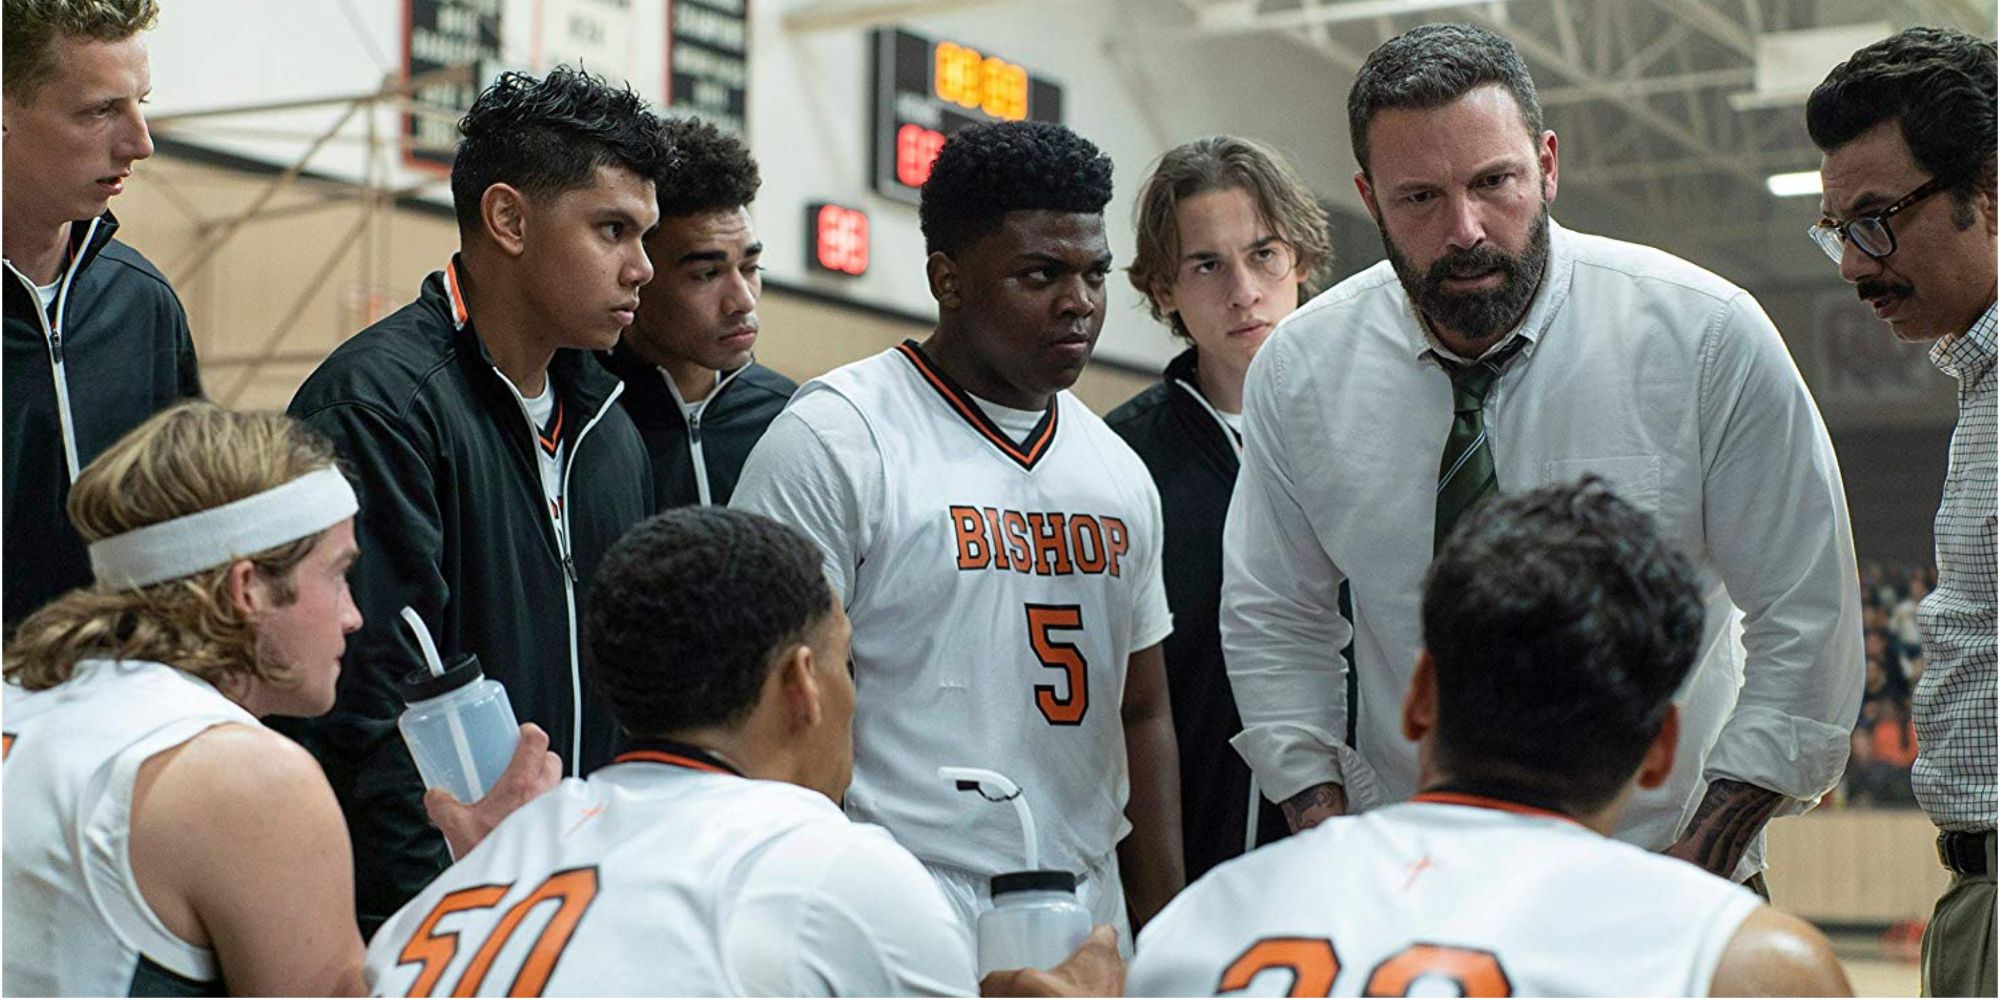 Ben Affleck and the basketball team in The Way Back